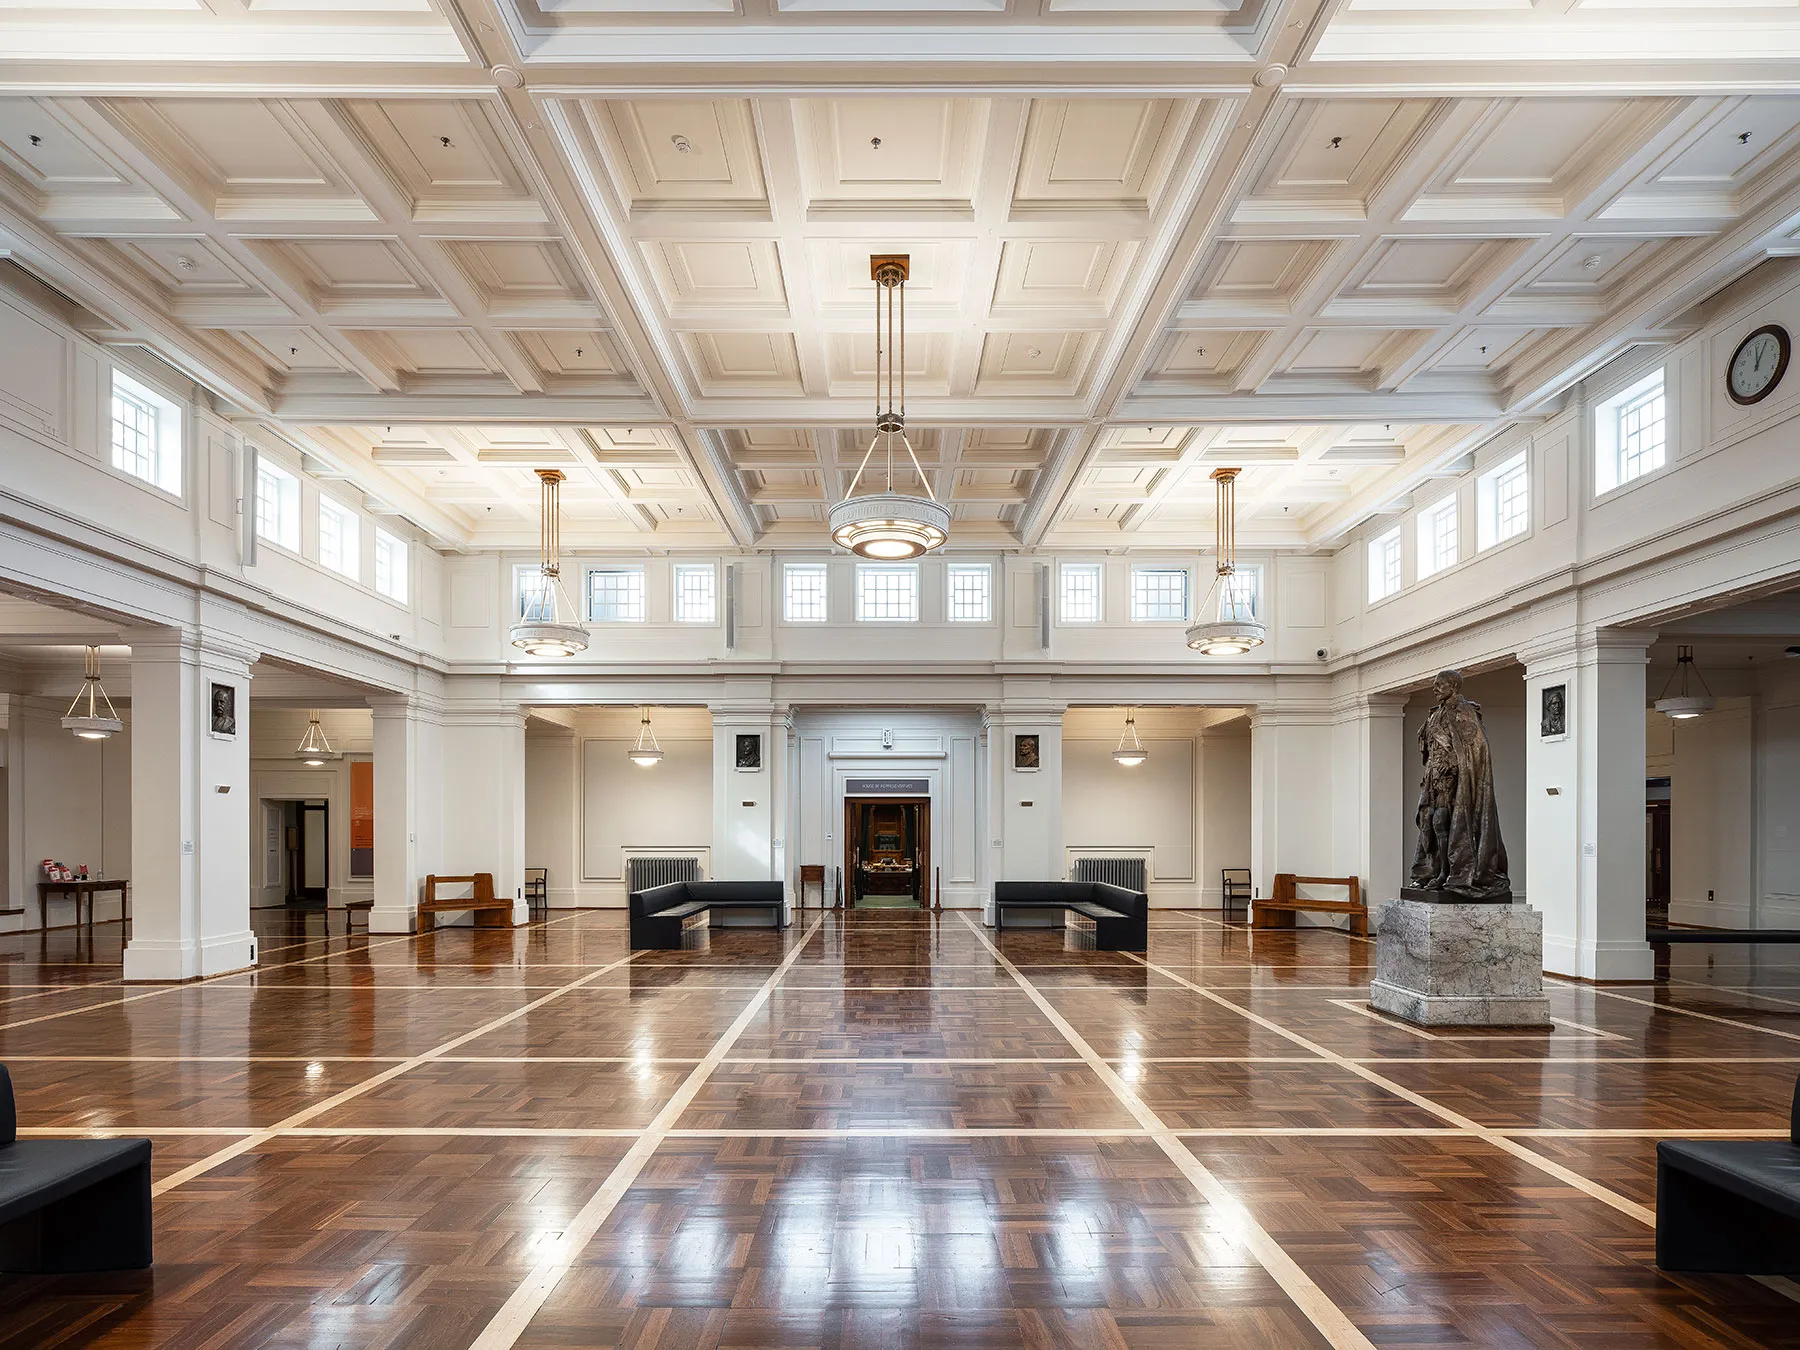 King's Hall at MoAD at Old Parliament House featuring parquetry floors, a statue, couches and hanging lights from an ornate ceiling.